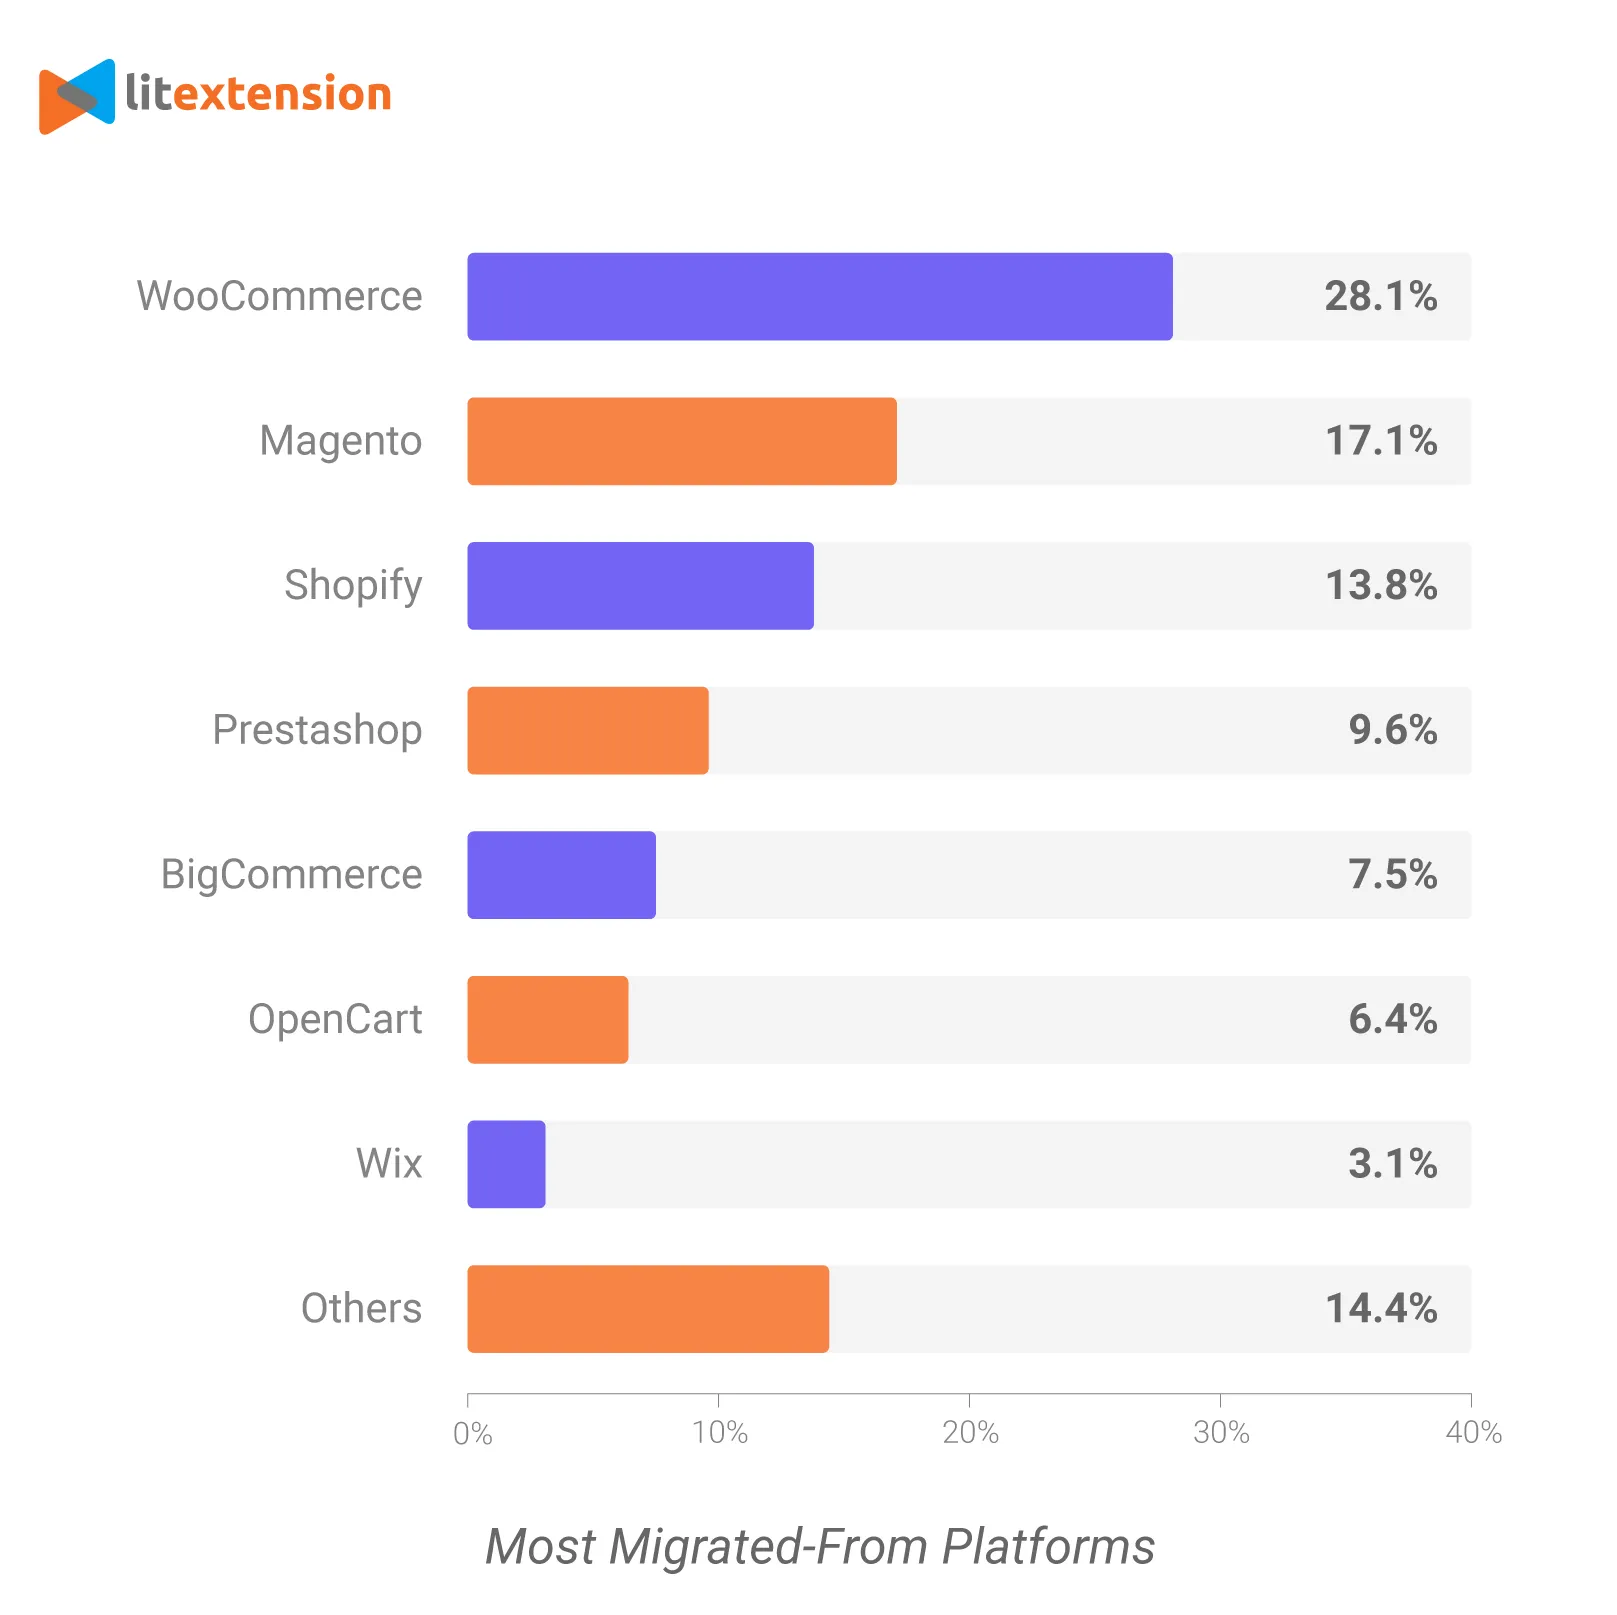 Most migrated-from platforms